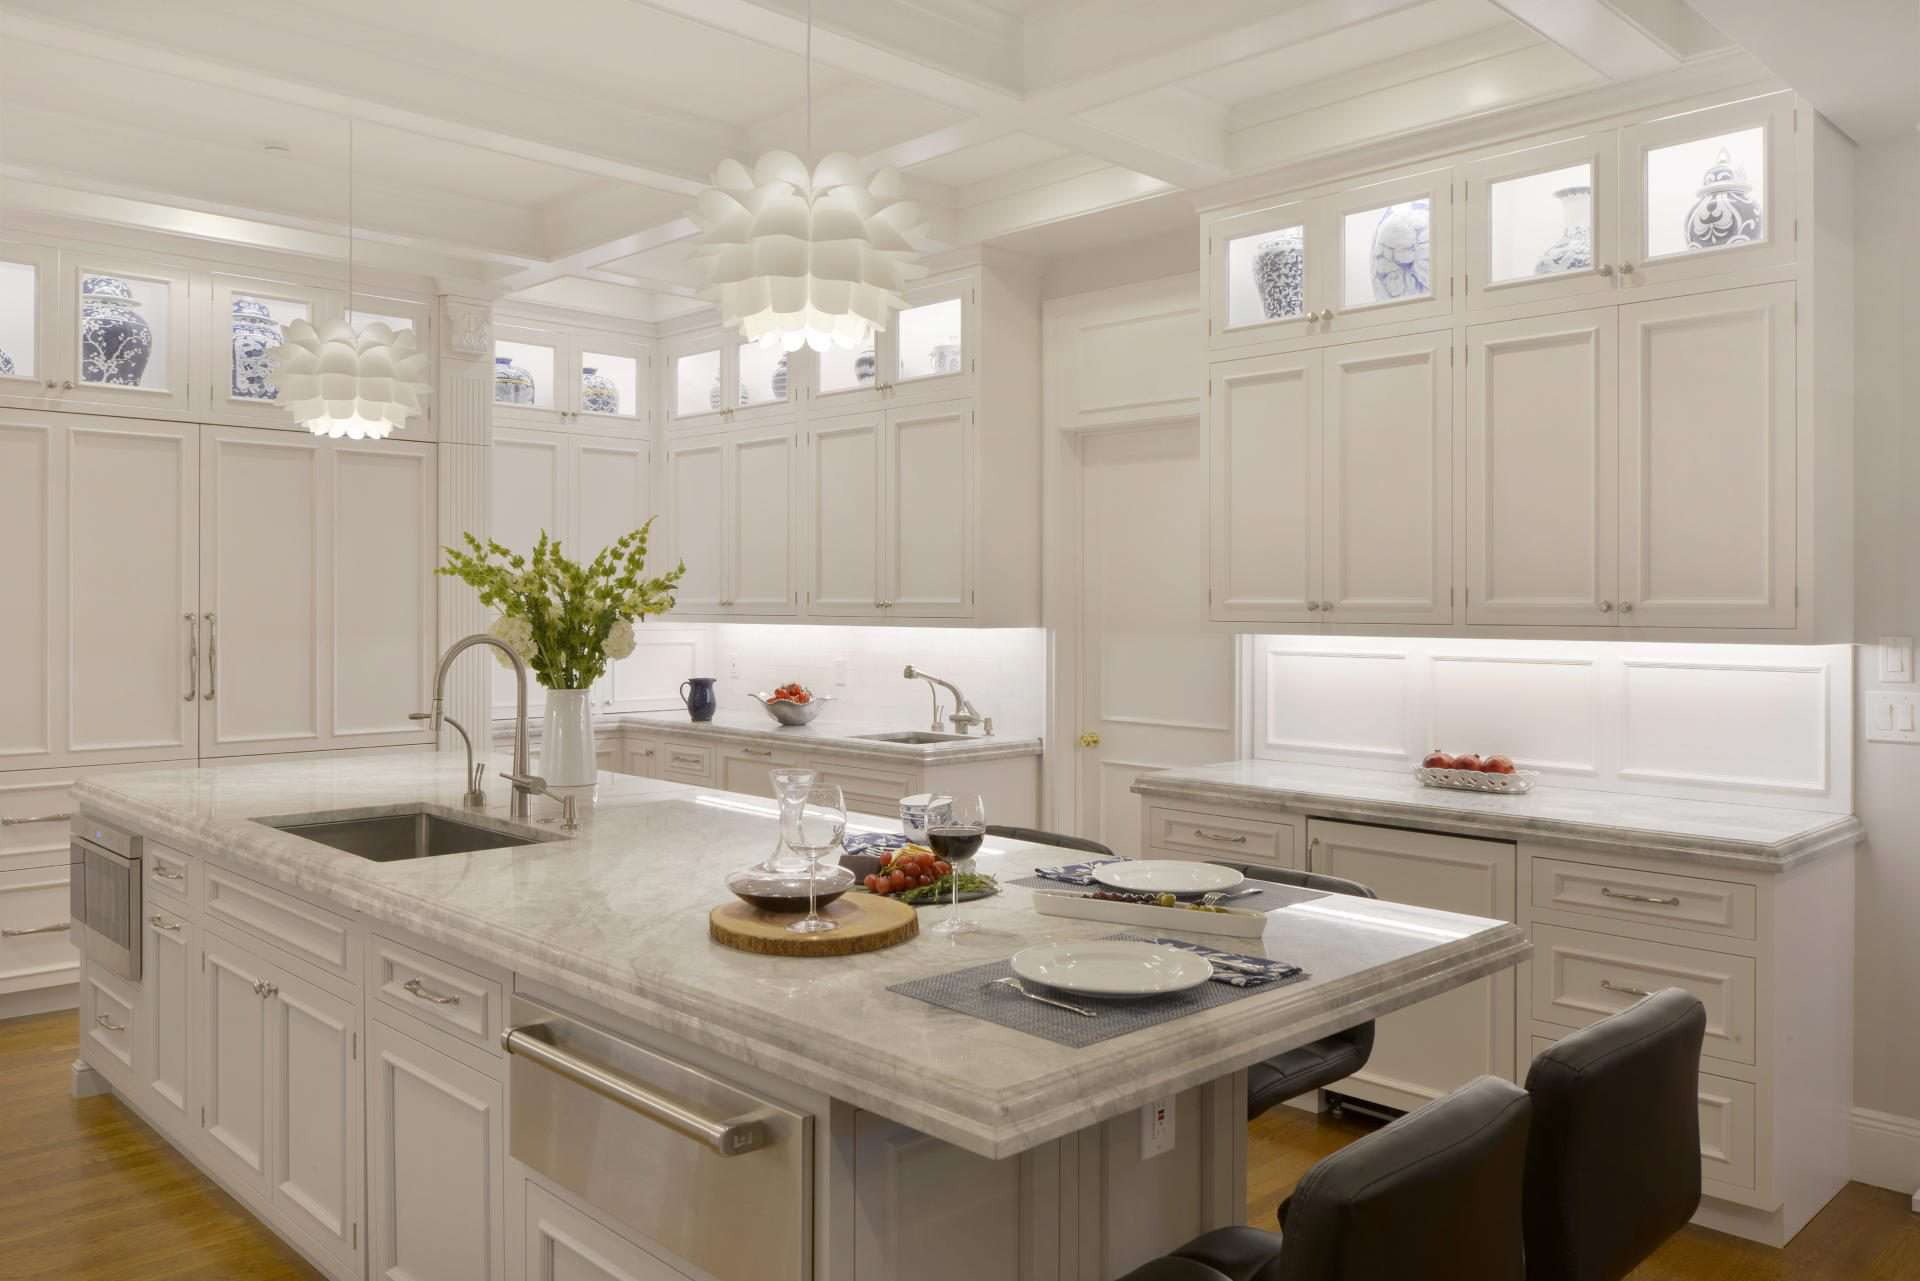 Stunning white kitchen features island that incorporates a sink, paneled dishwasher, trash pullout, microwave, and warming drawer.